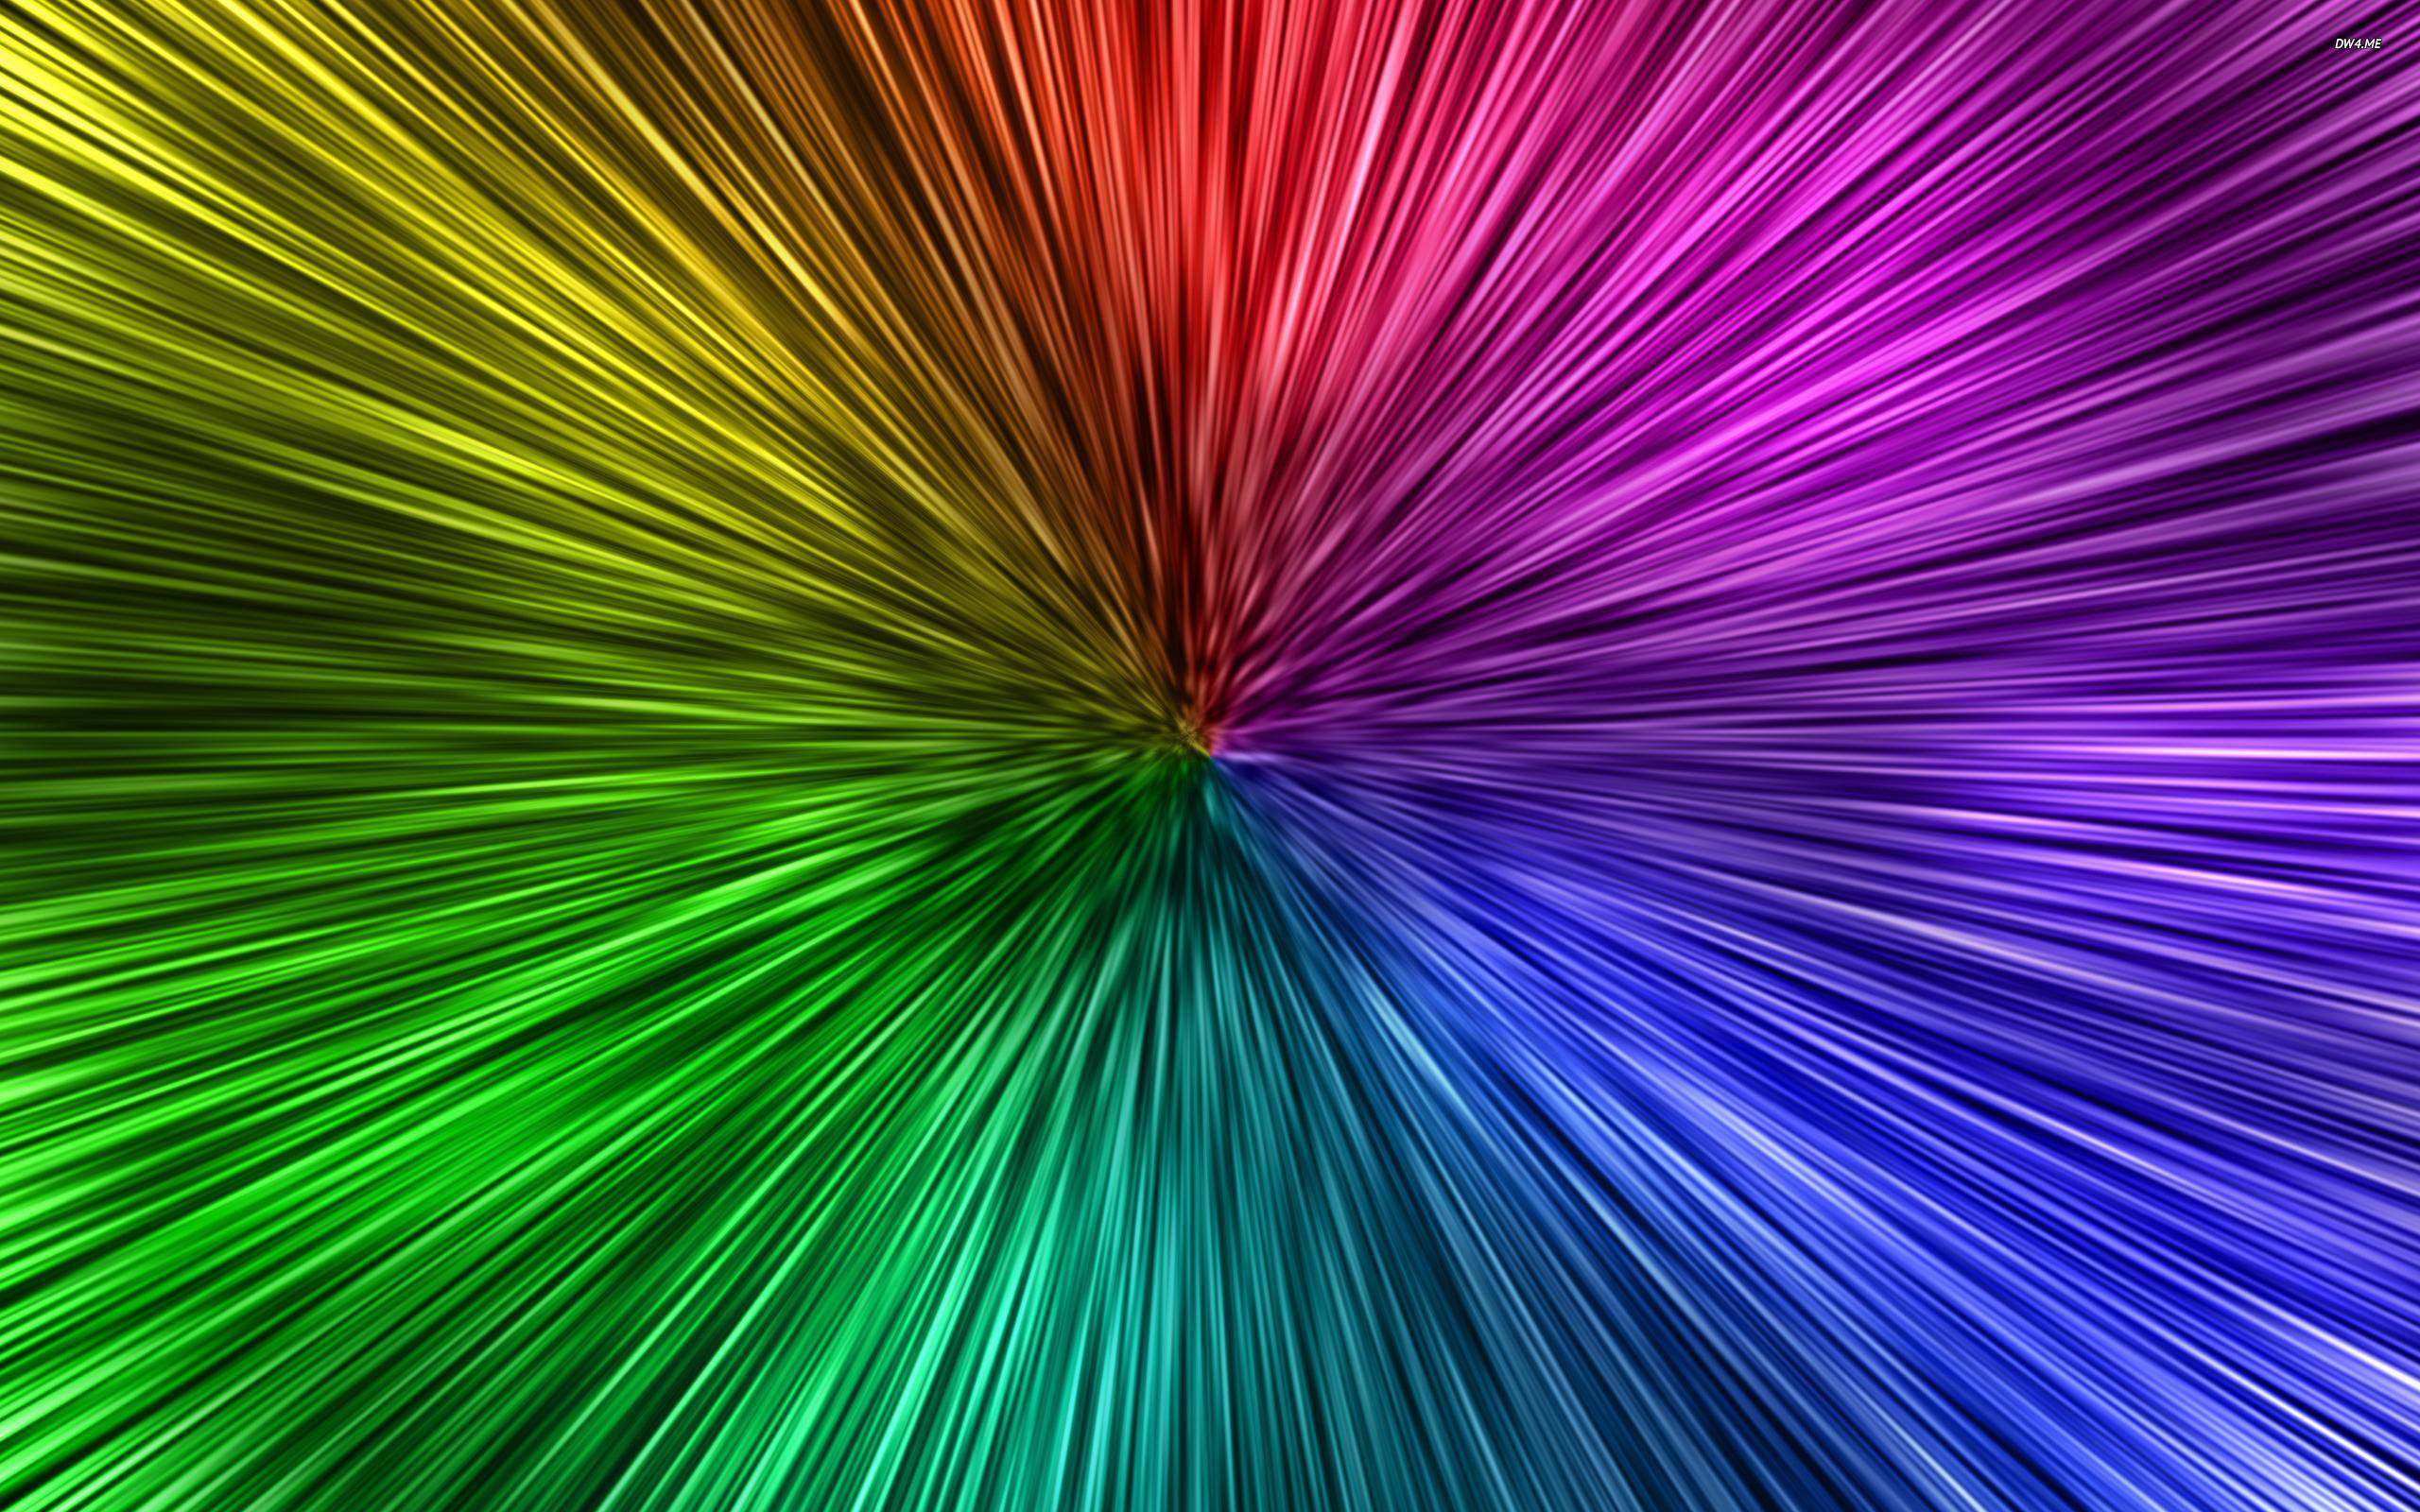 Wallpaper For > Solid Neon Colors Wallpaper